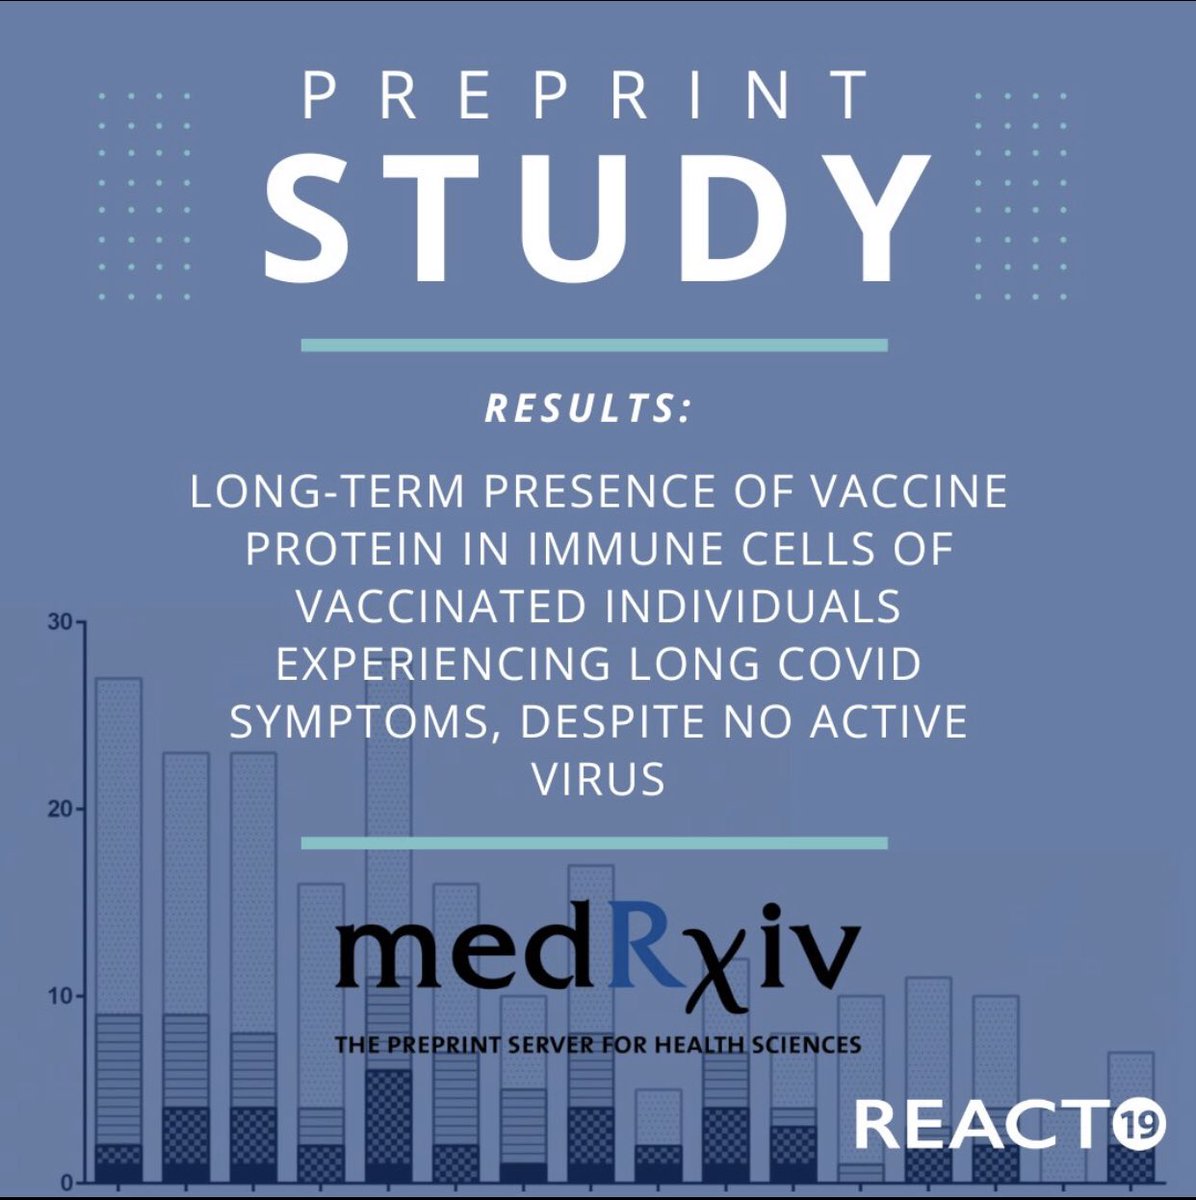 New Preprint: ‘The results suggest a link between the persistent presence of the S1 protein in immune cells and the development of PASC-like symptoms in vaccinated individuals’. #S1 #COVID19